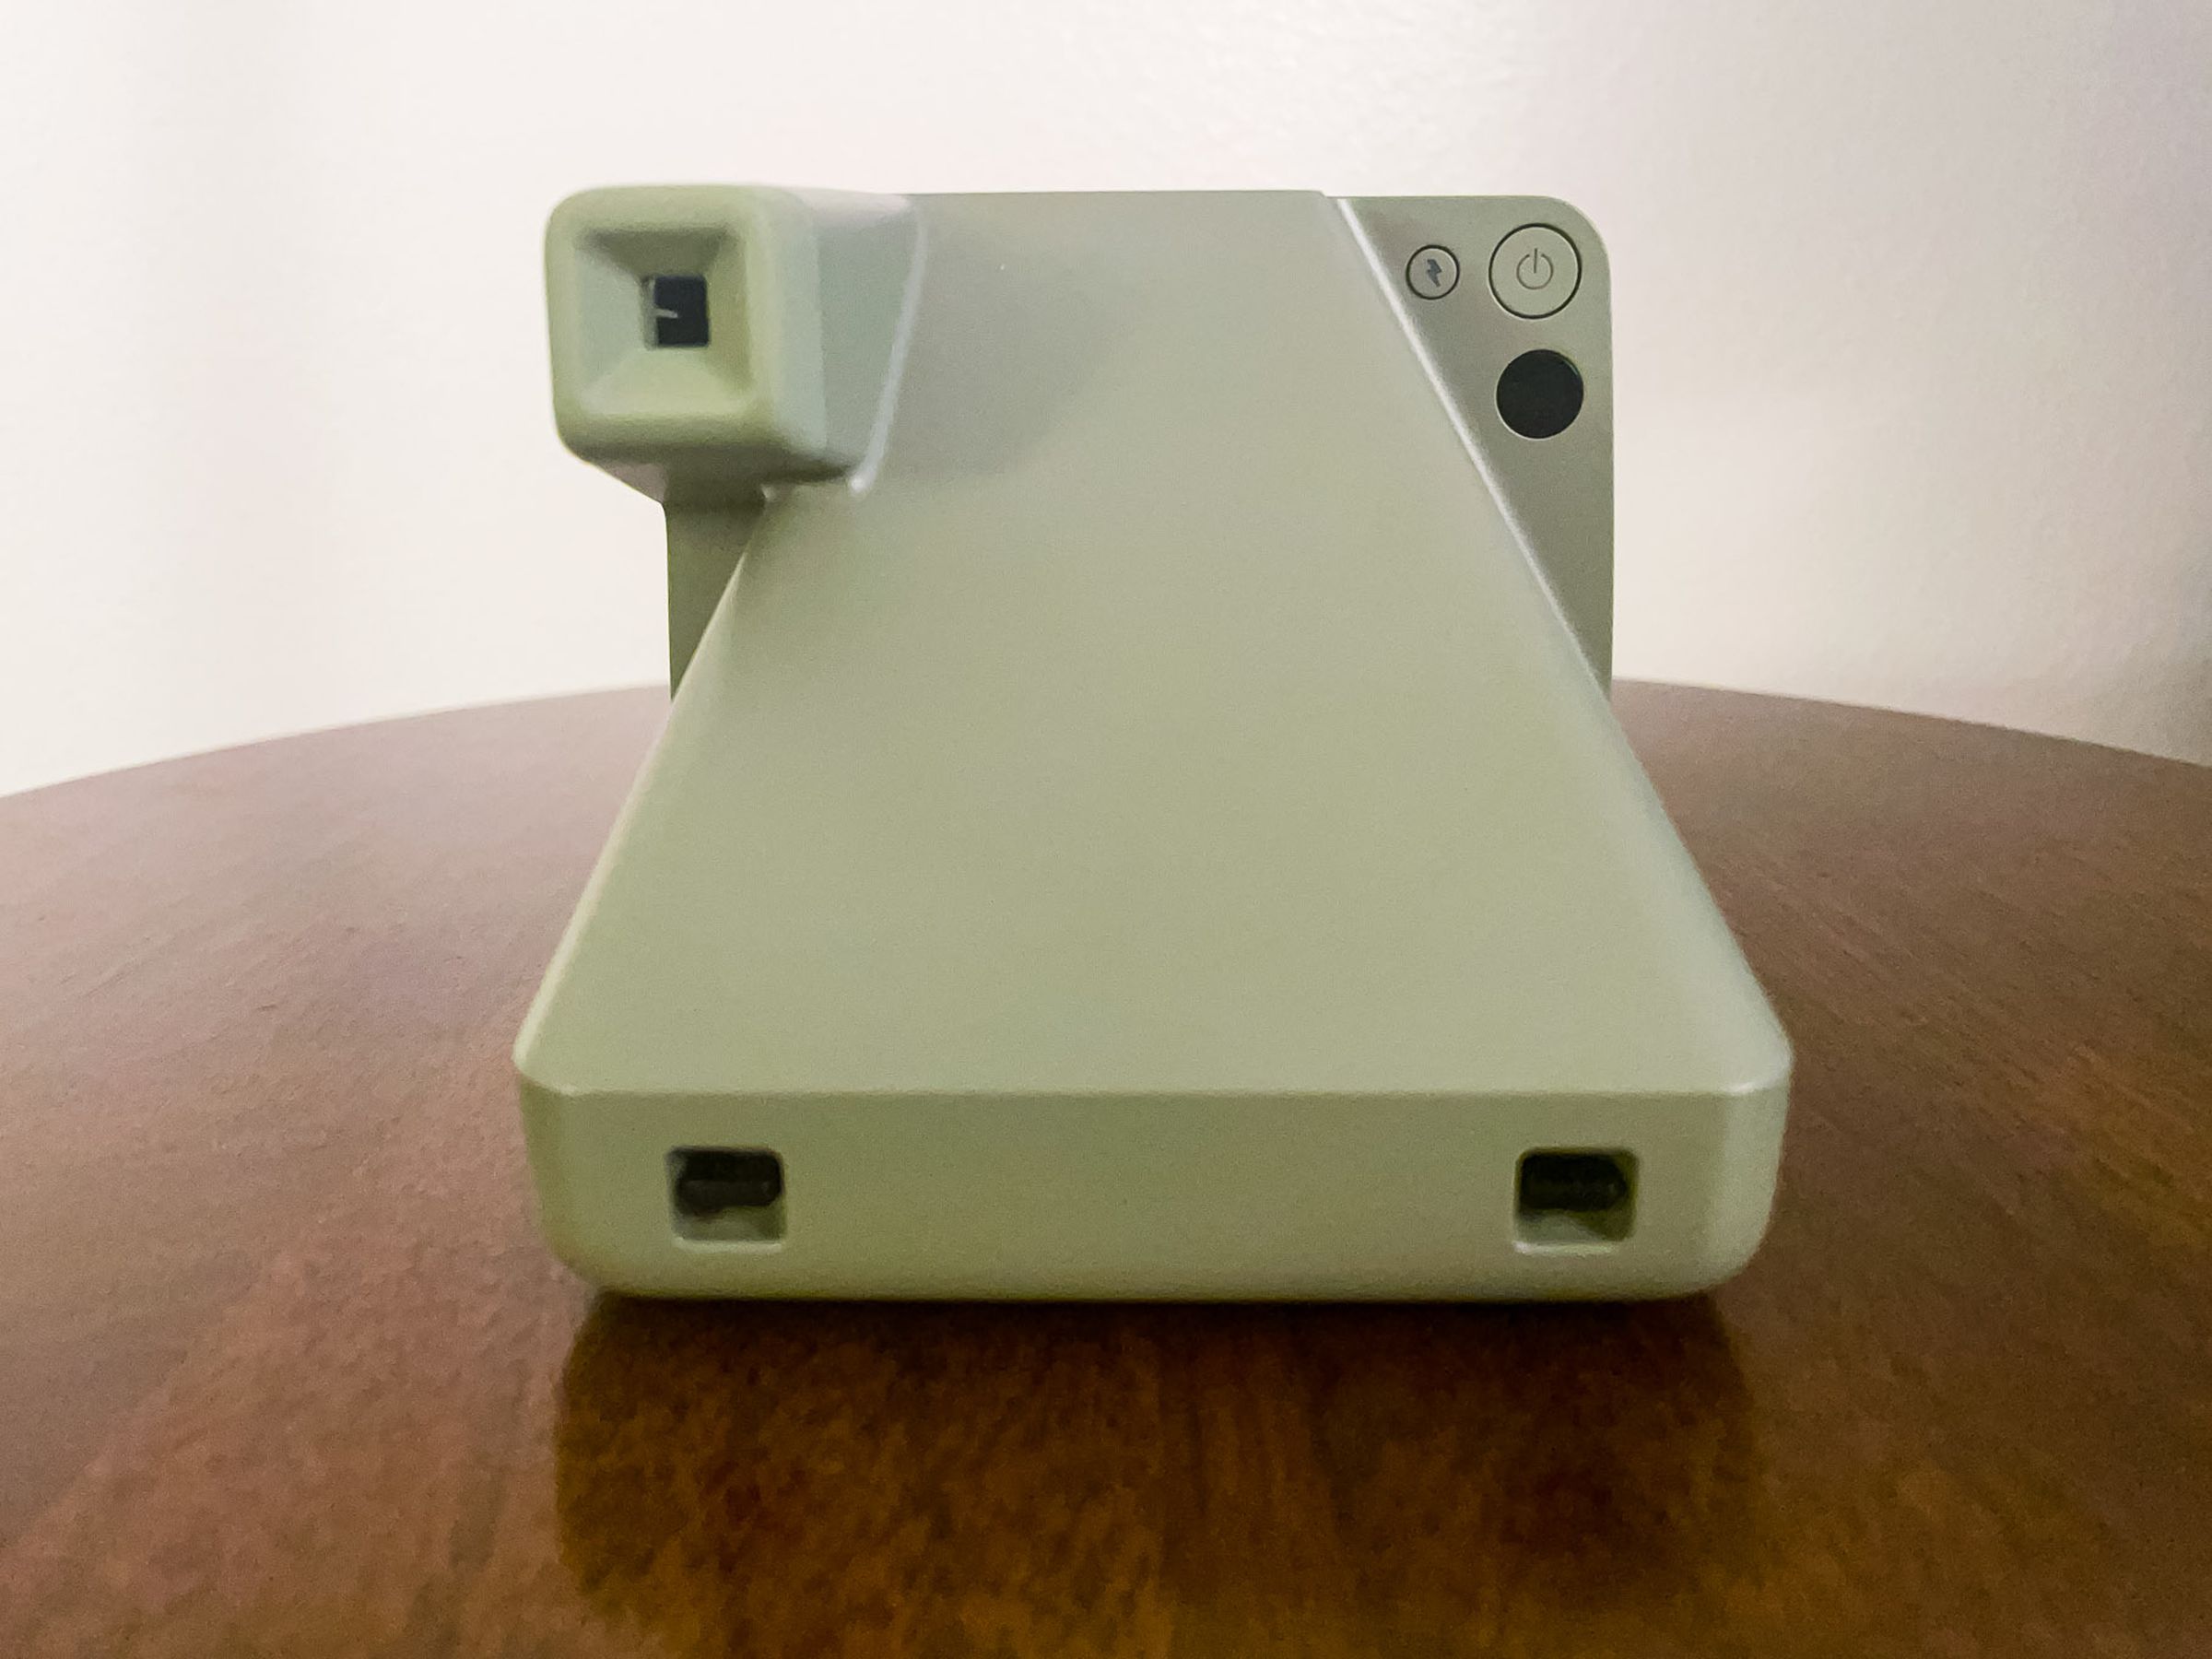 The back of the green second-gen Polaroid Now Plus resting on a table with its viewfinder.